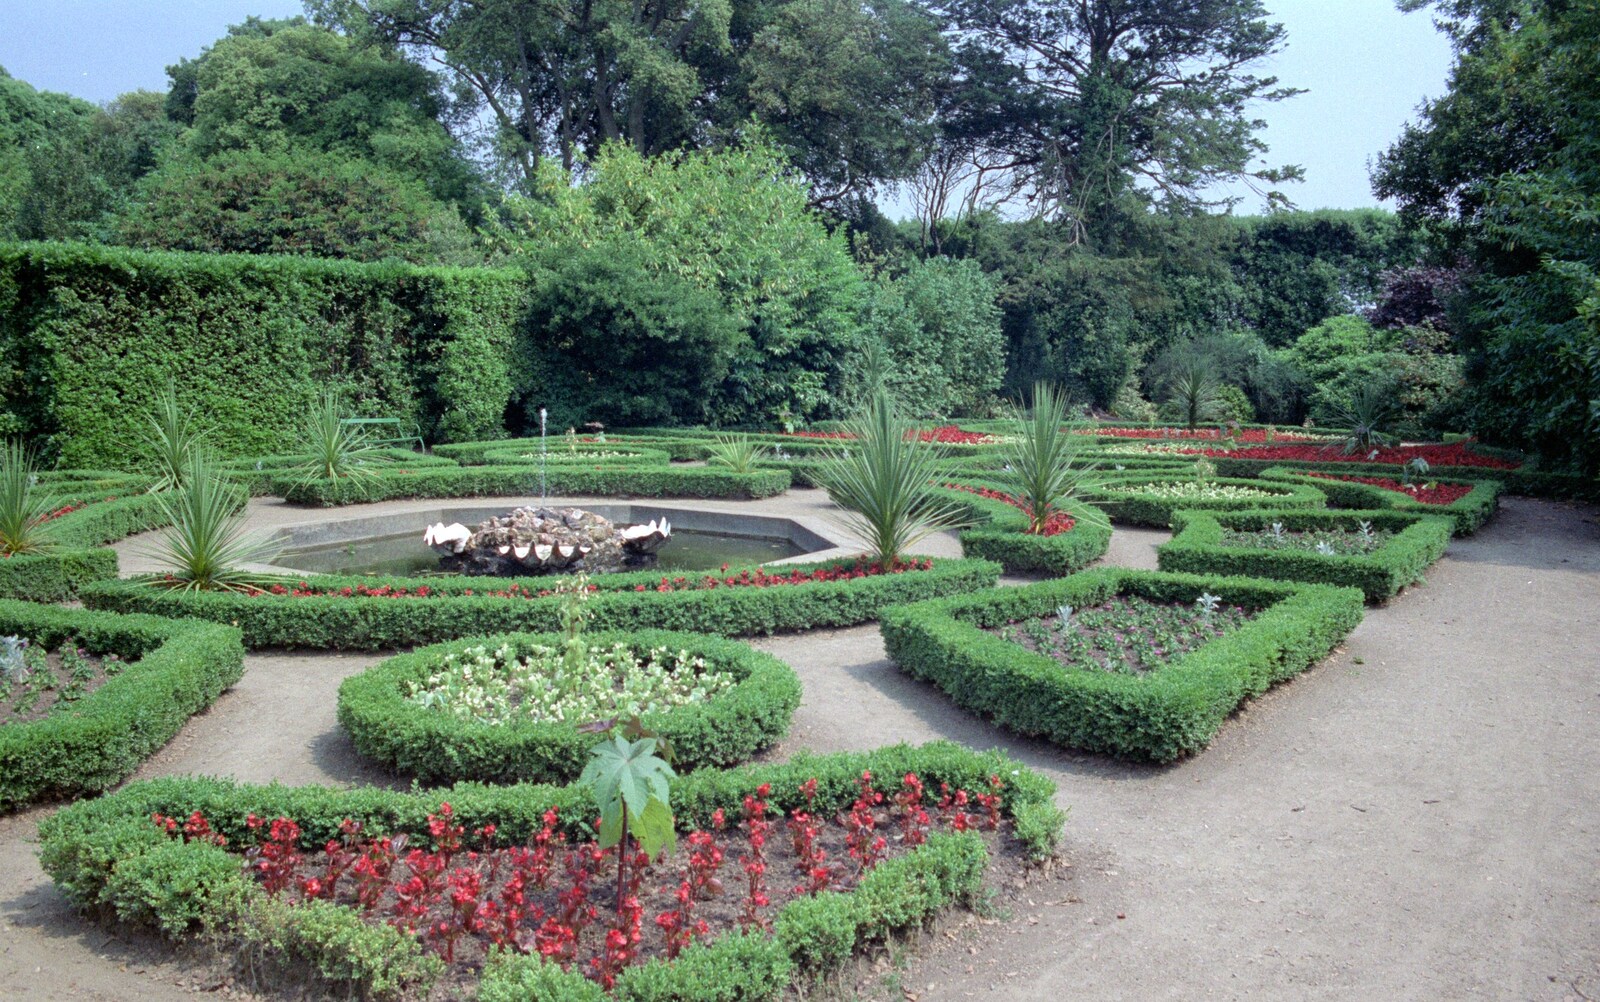 The formal gardens of Edgcumbe from Uni: A Trip to Mount Edgcumbe, Cornwall - 17th June 1989